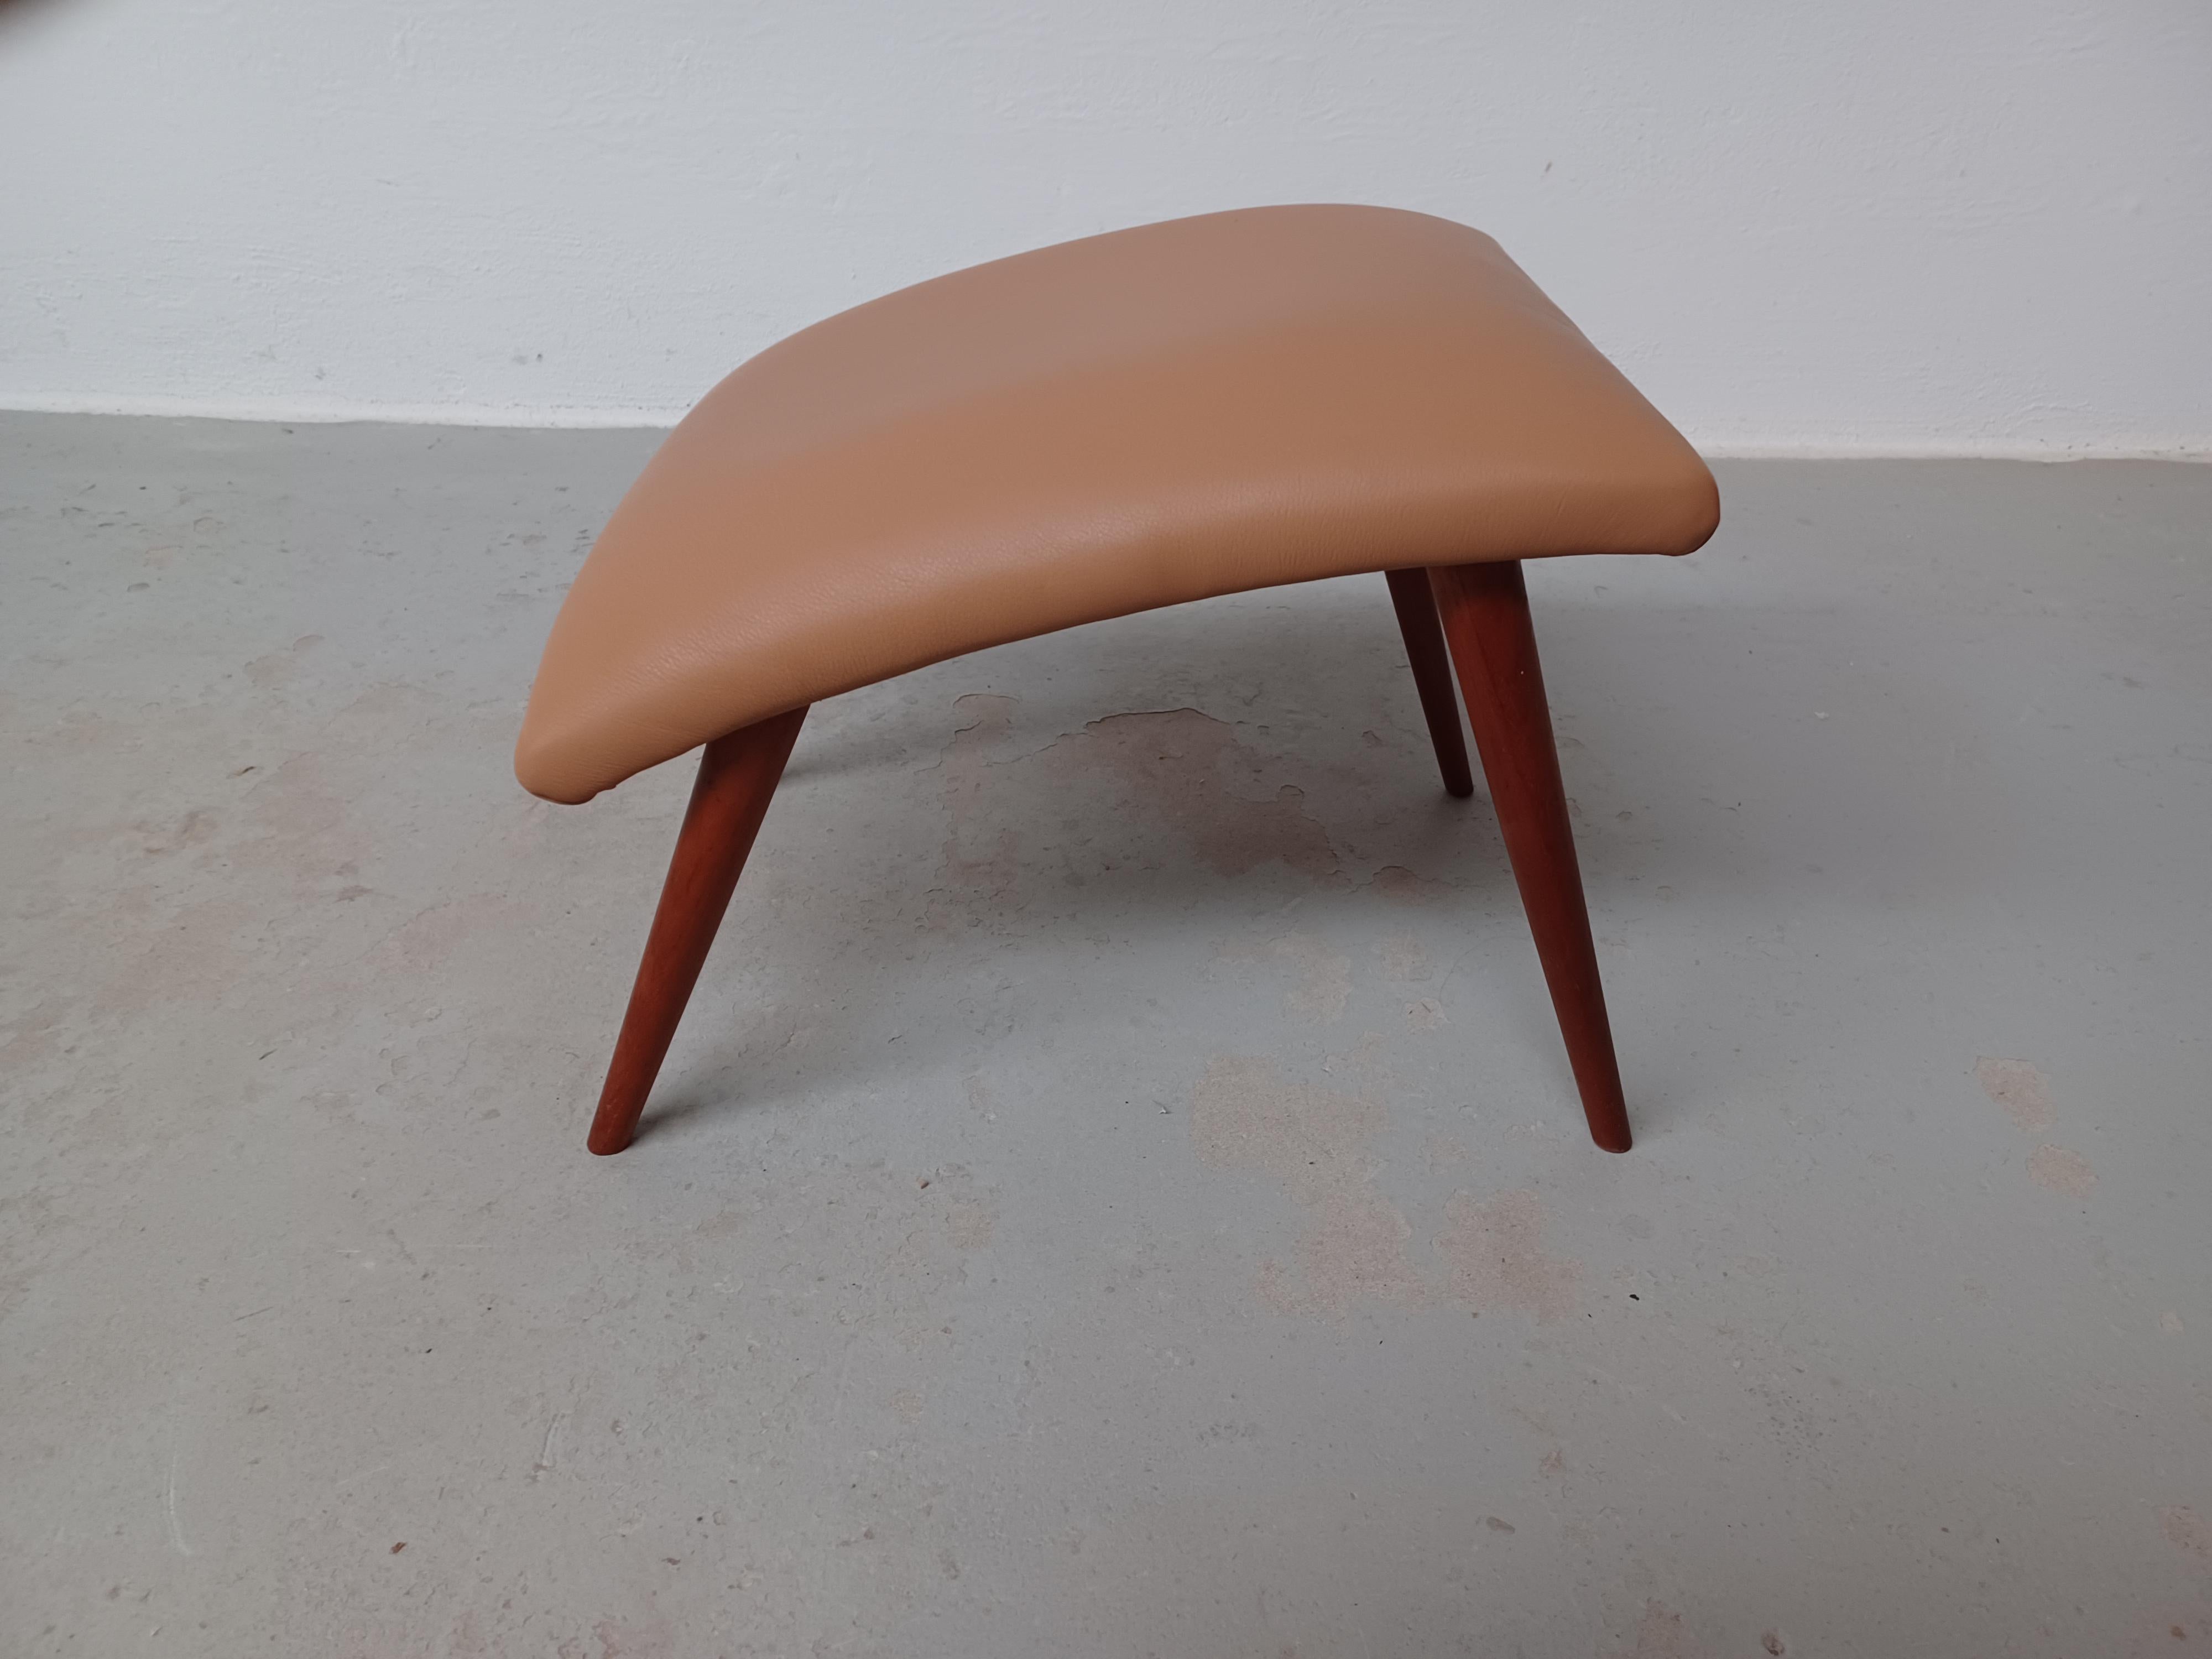 1960's Restored and  Refinished Danish footstool with leather upholstery.

Danish footstool in slimlined minimalistic yet advanced Scandinavian modern design with it's combination of straight simple lines combined with it's organic curved seat and